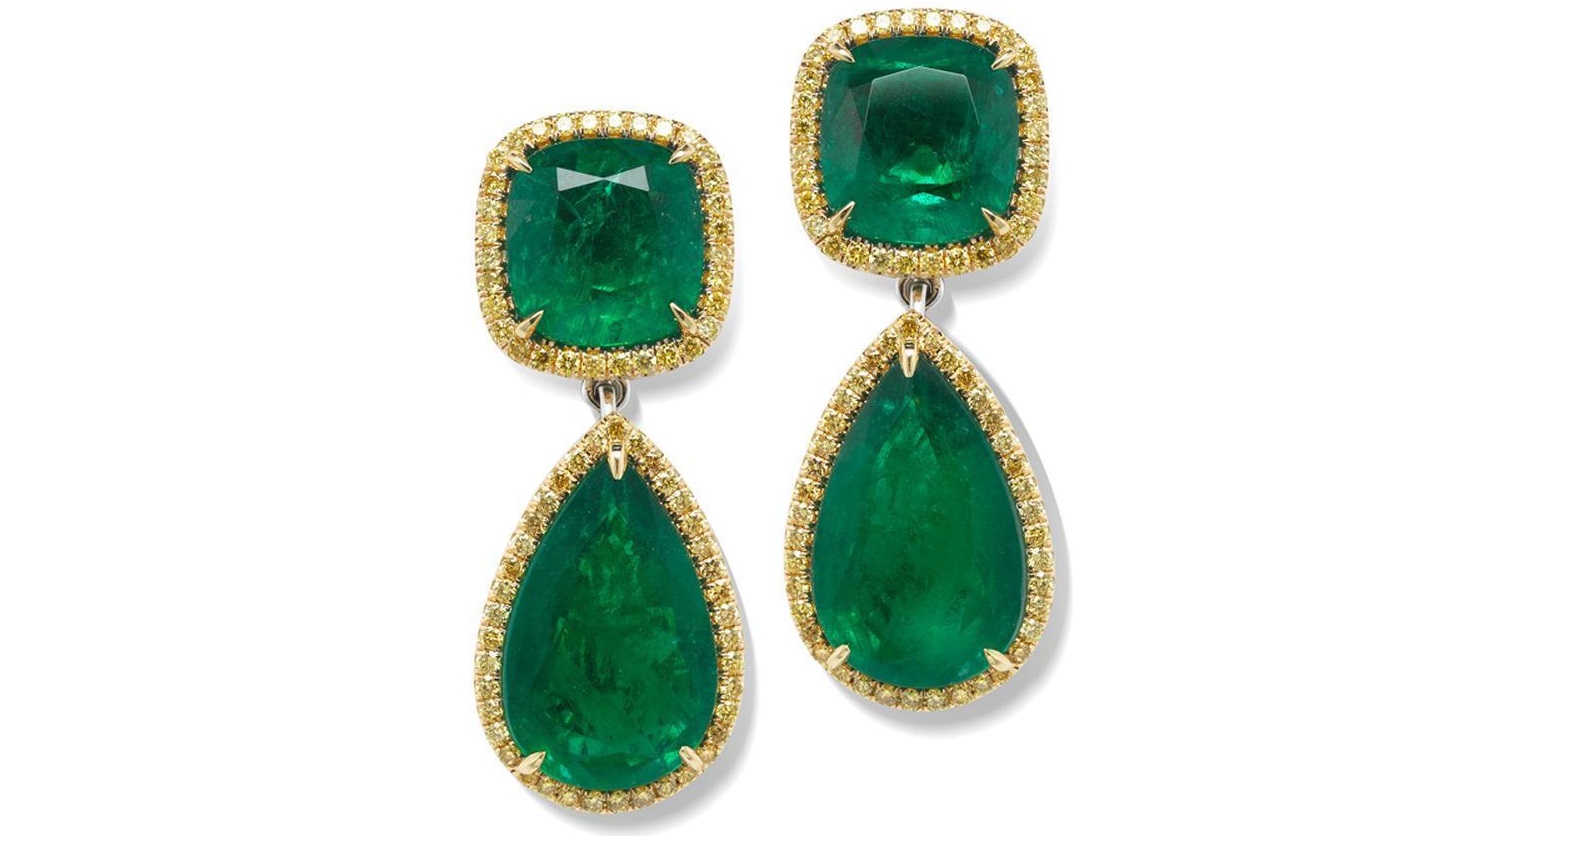 36.38ct Natural Emerald Fancy Yellow and White Diamond 18k gold earrings GIA